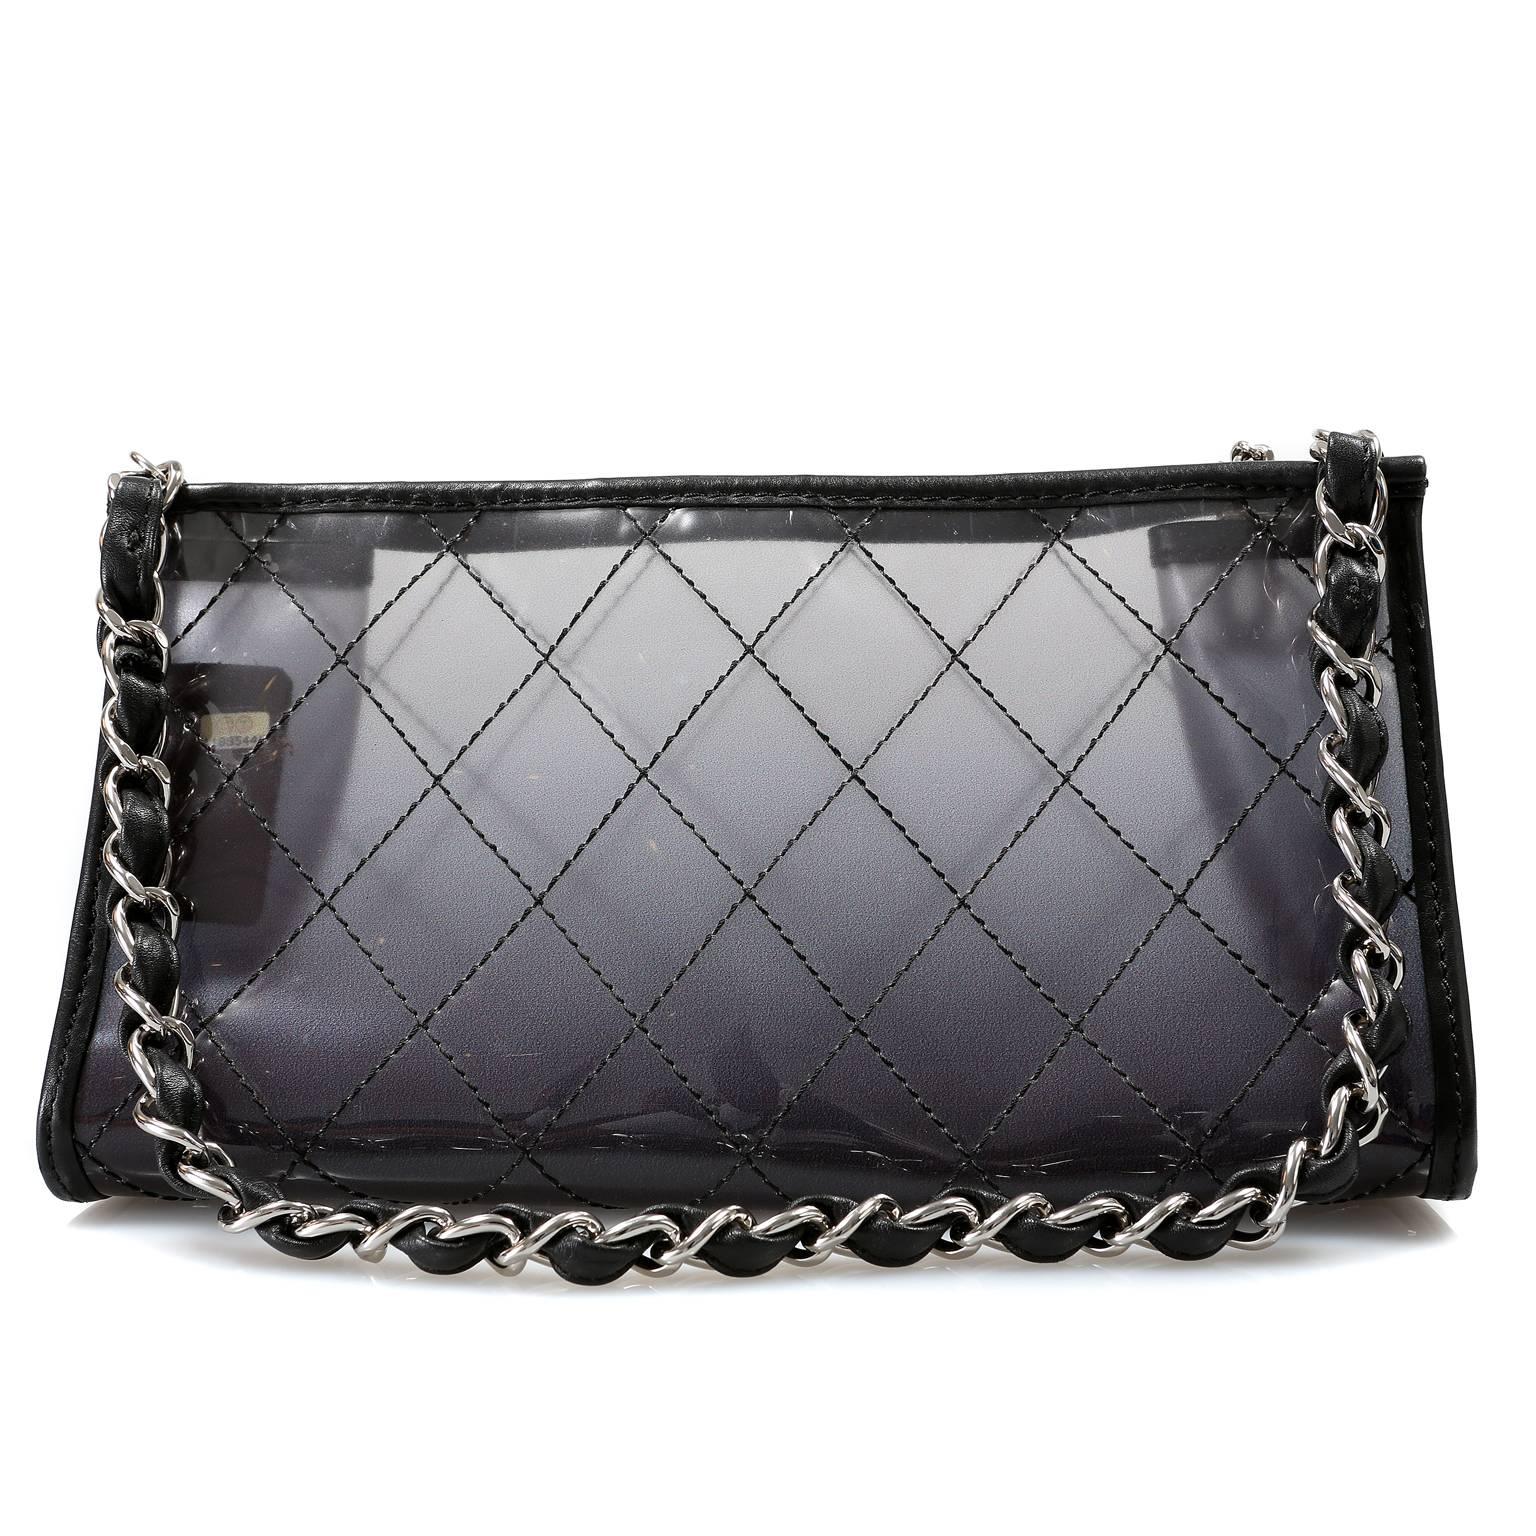 Chanel Smoked Degrade  Bag- PRISTINE condition
Totally unique in this semitransparent composition, this Chanel is a must have for collectors.
 
Smoky grey polyurethane is stitched in signature Chanel diamond pattern with black thread and trimmed